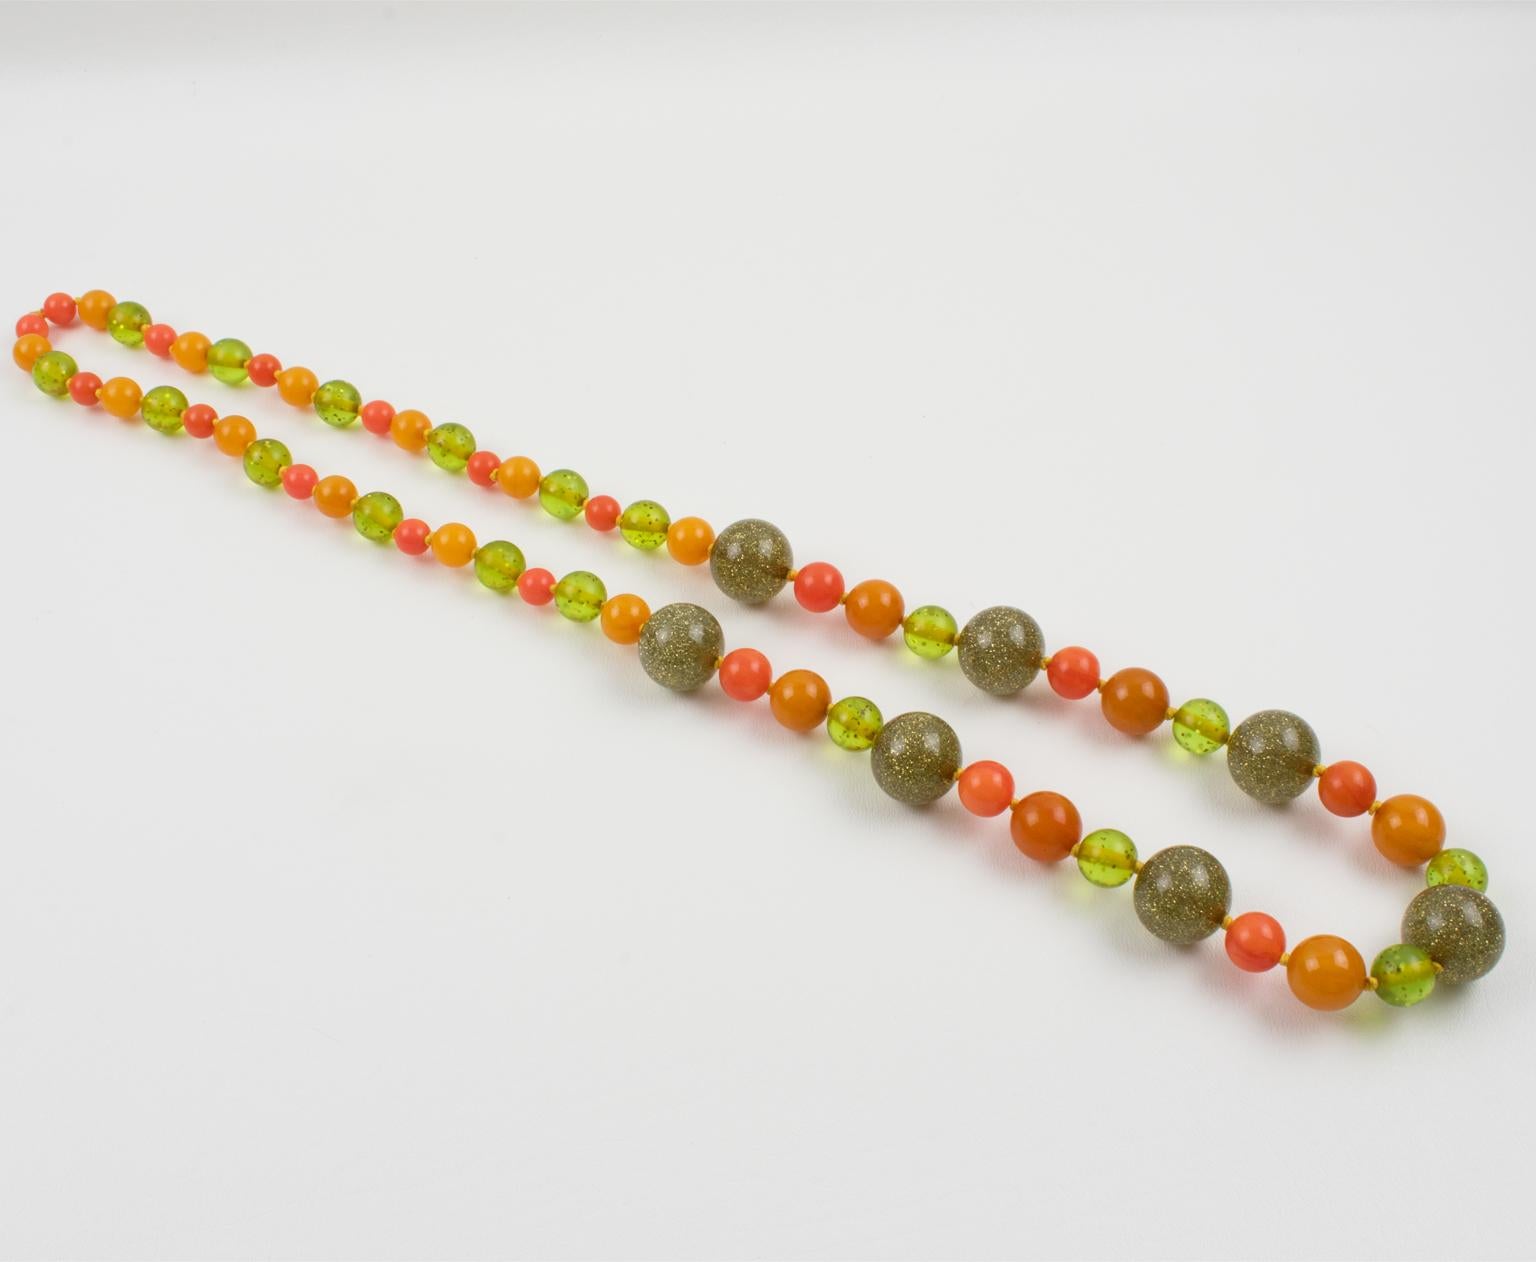 Bakelite and Lucite Extra Long Necklace with Orange, Green and Glitter Beads For Sale 3